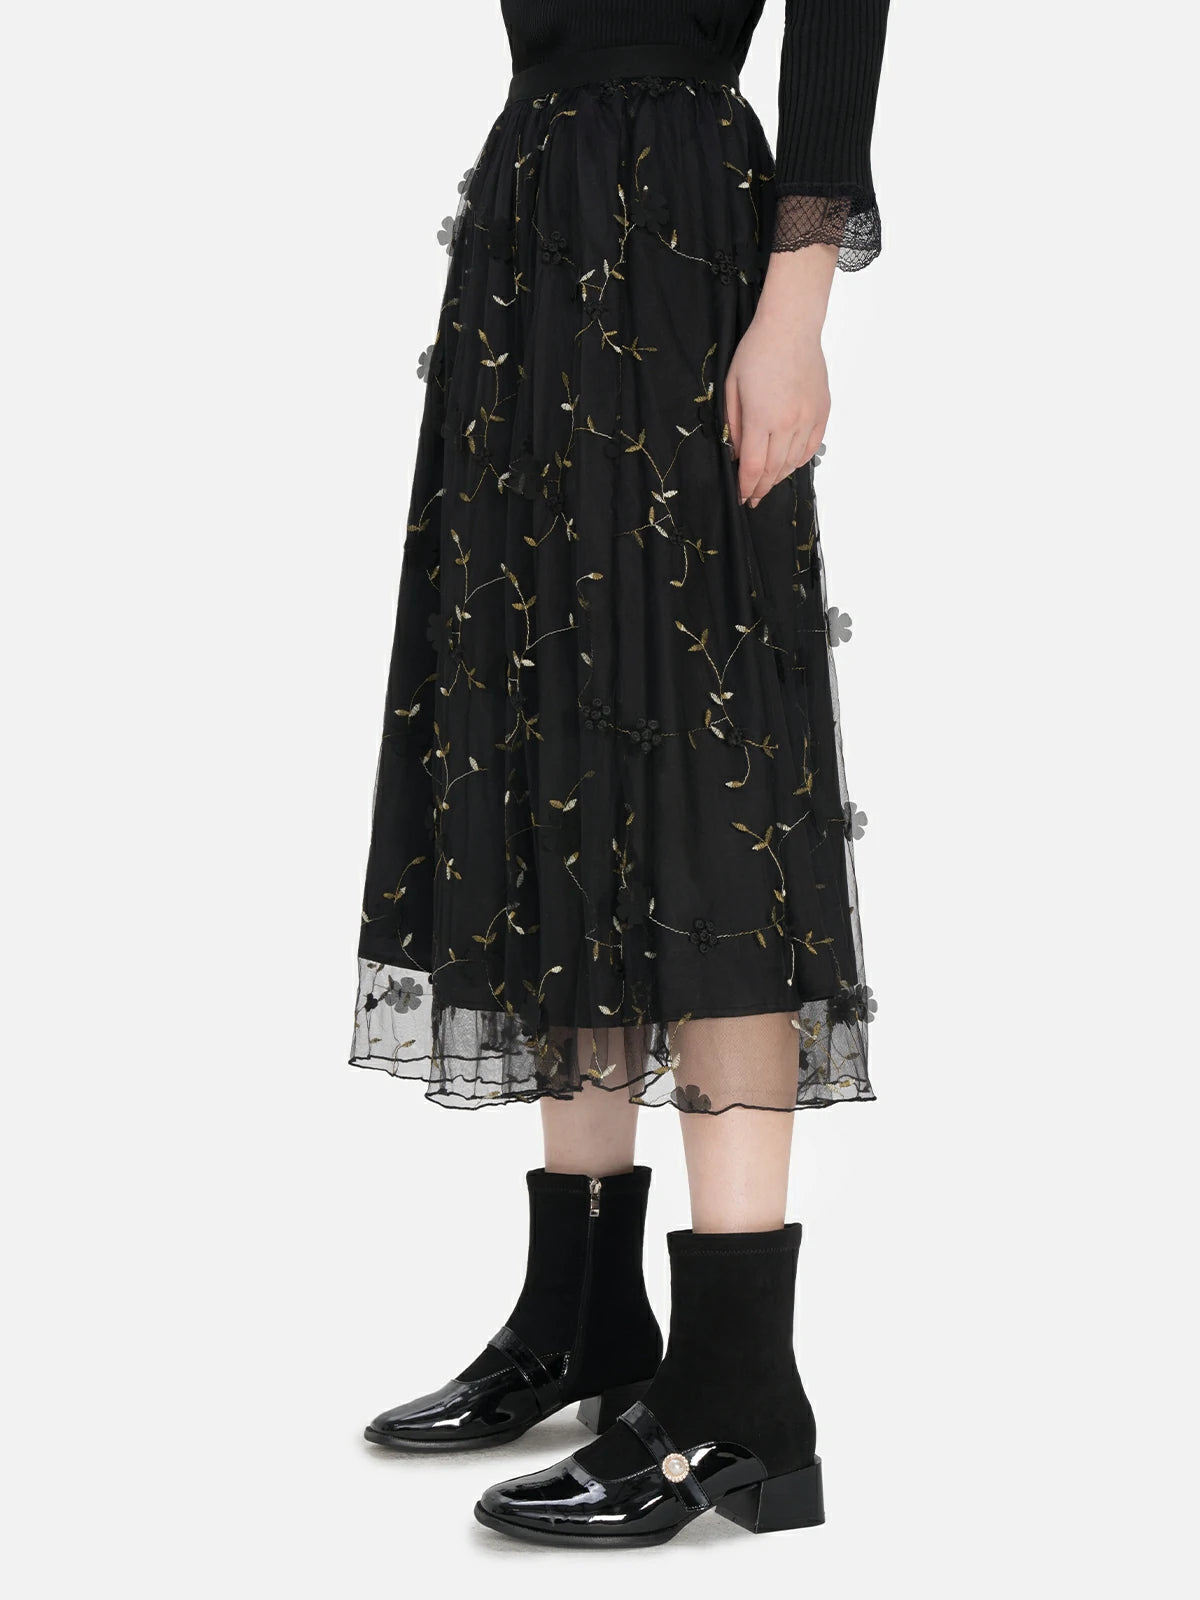 Romantic midi tulle skirt with a dual-layer construction, showcasing embroidered leaf patterns and three-dimensional floral designs for a sophisticated look.